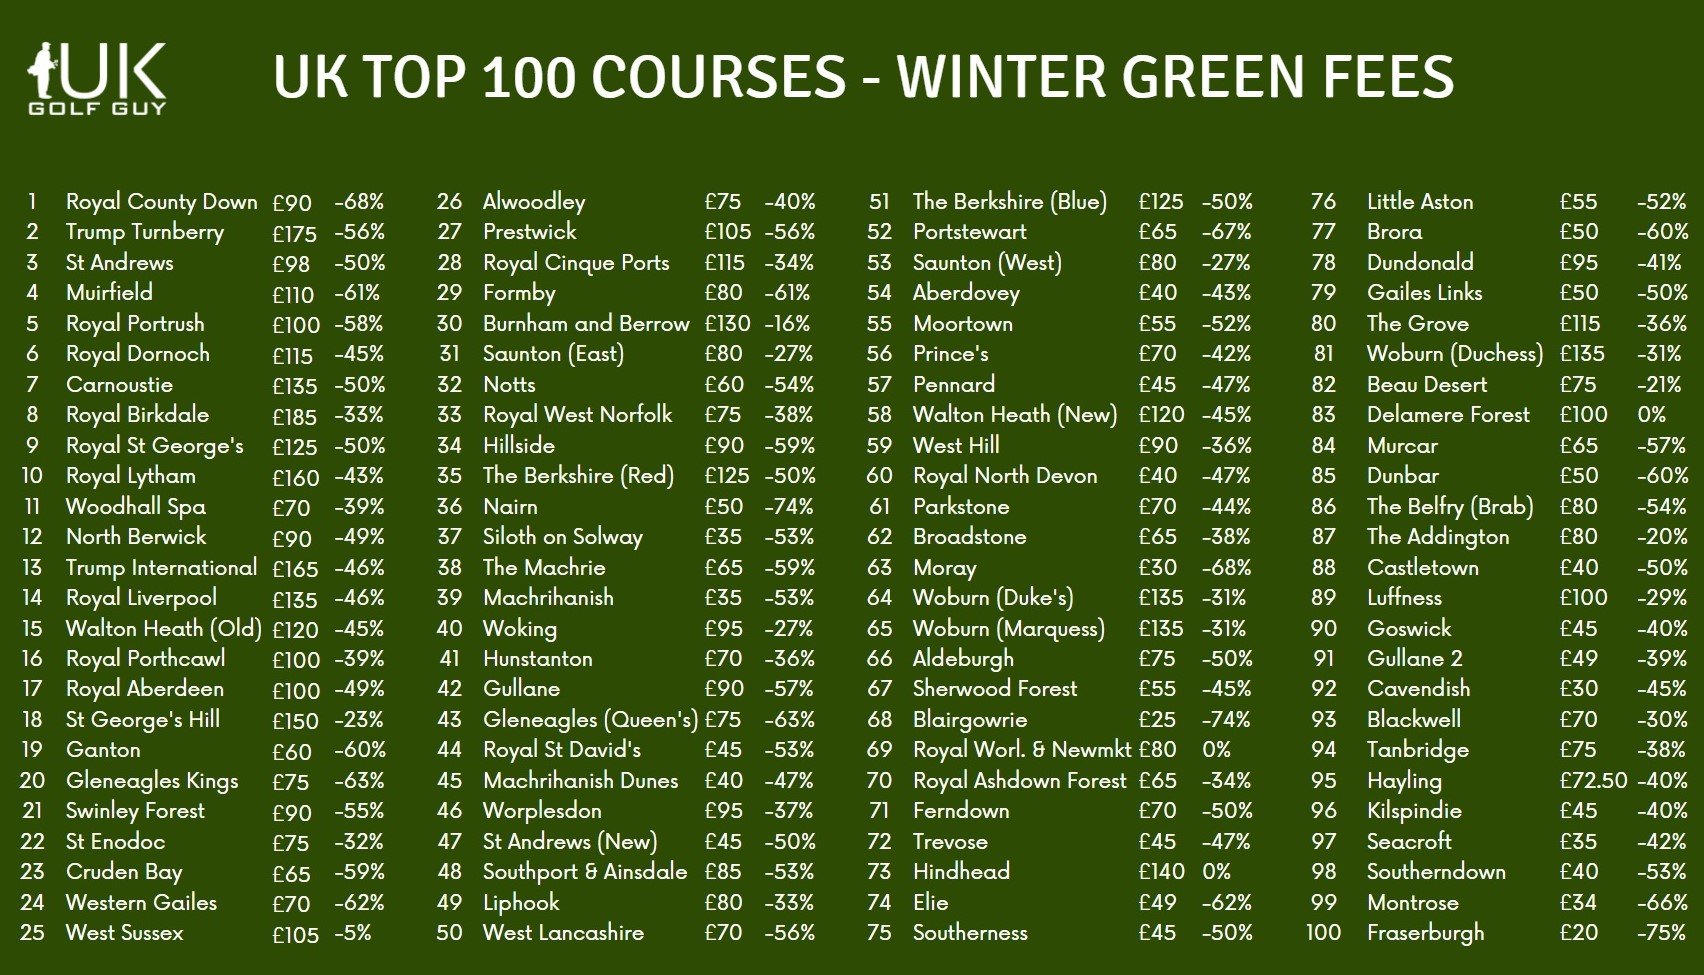 Winter Green fee deals at the UK's Top 100 — UK Golf